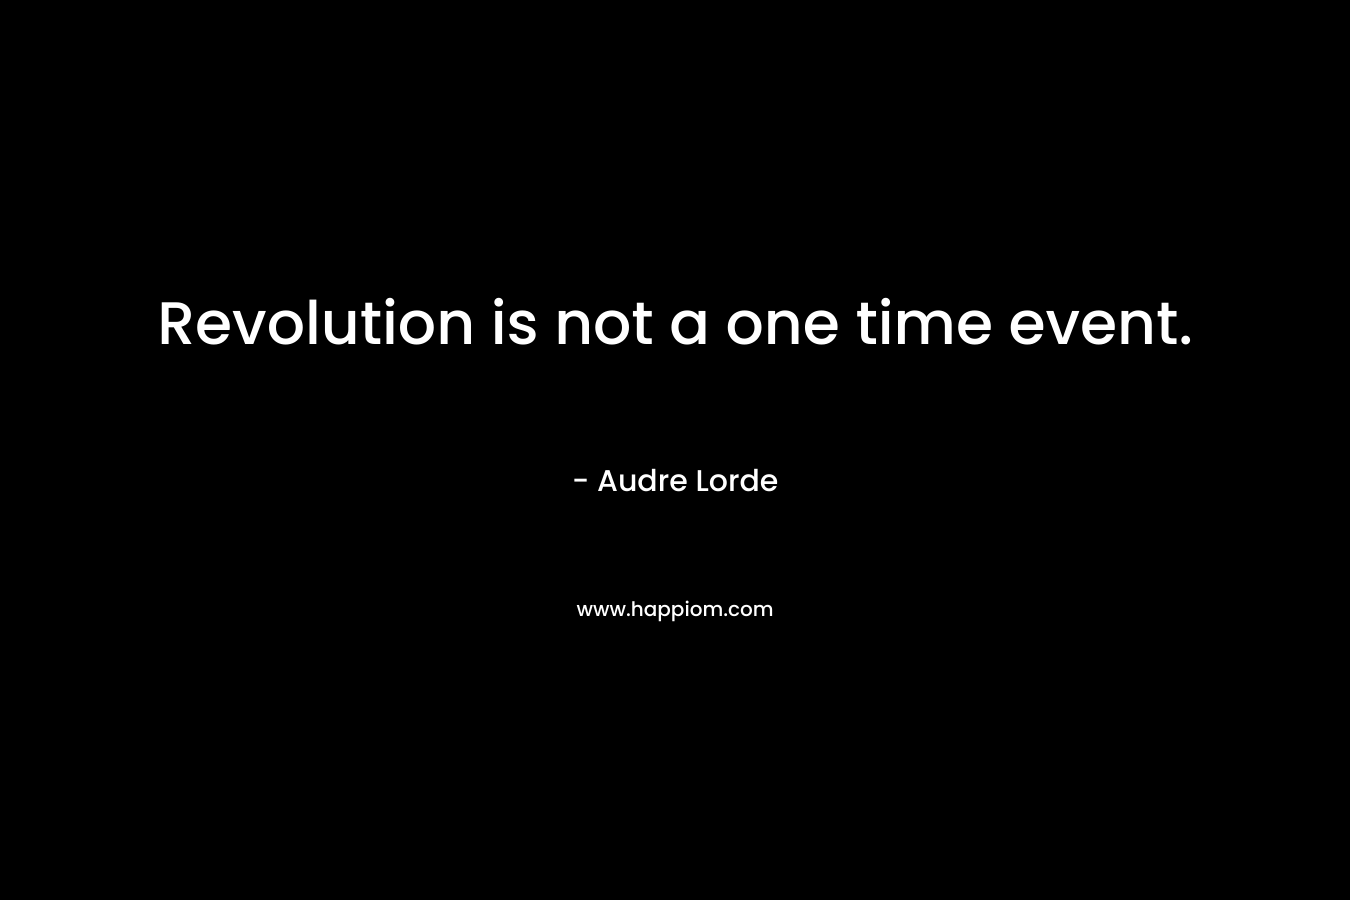 Revolution is not a one time event. – Audre Lorde